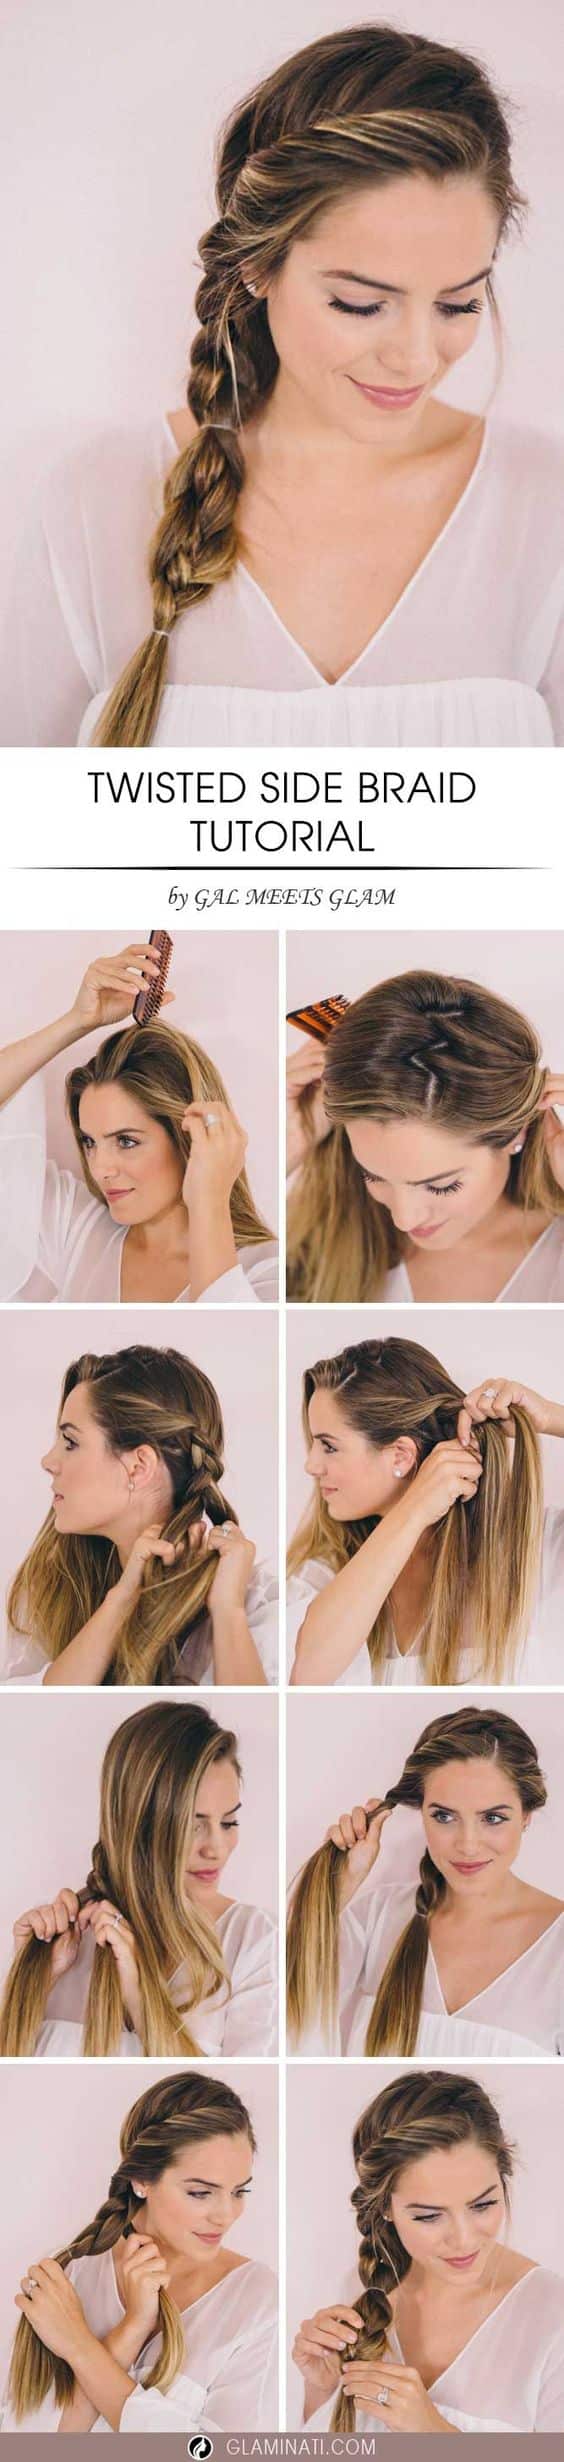 These 11 Easy & Quick Braids Will Save You SO MUCH TIME! There are half up styles, pony tails, and more!